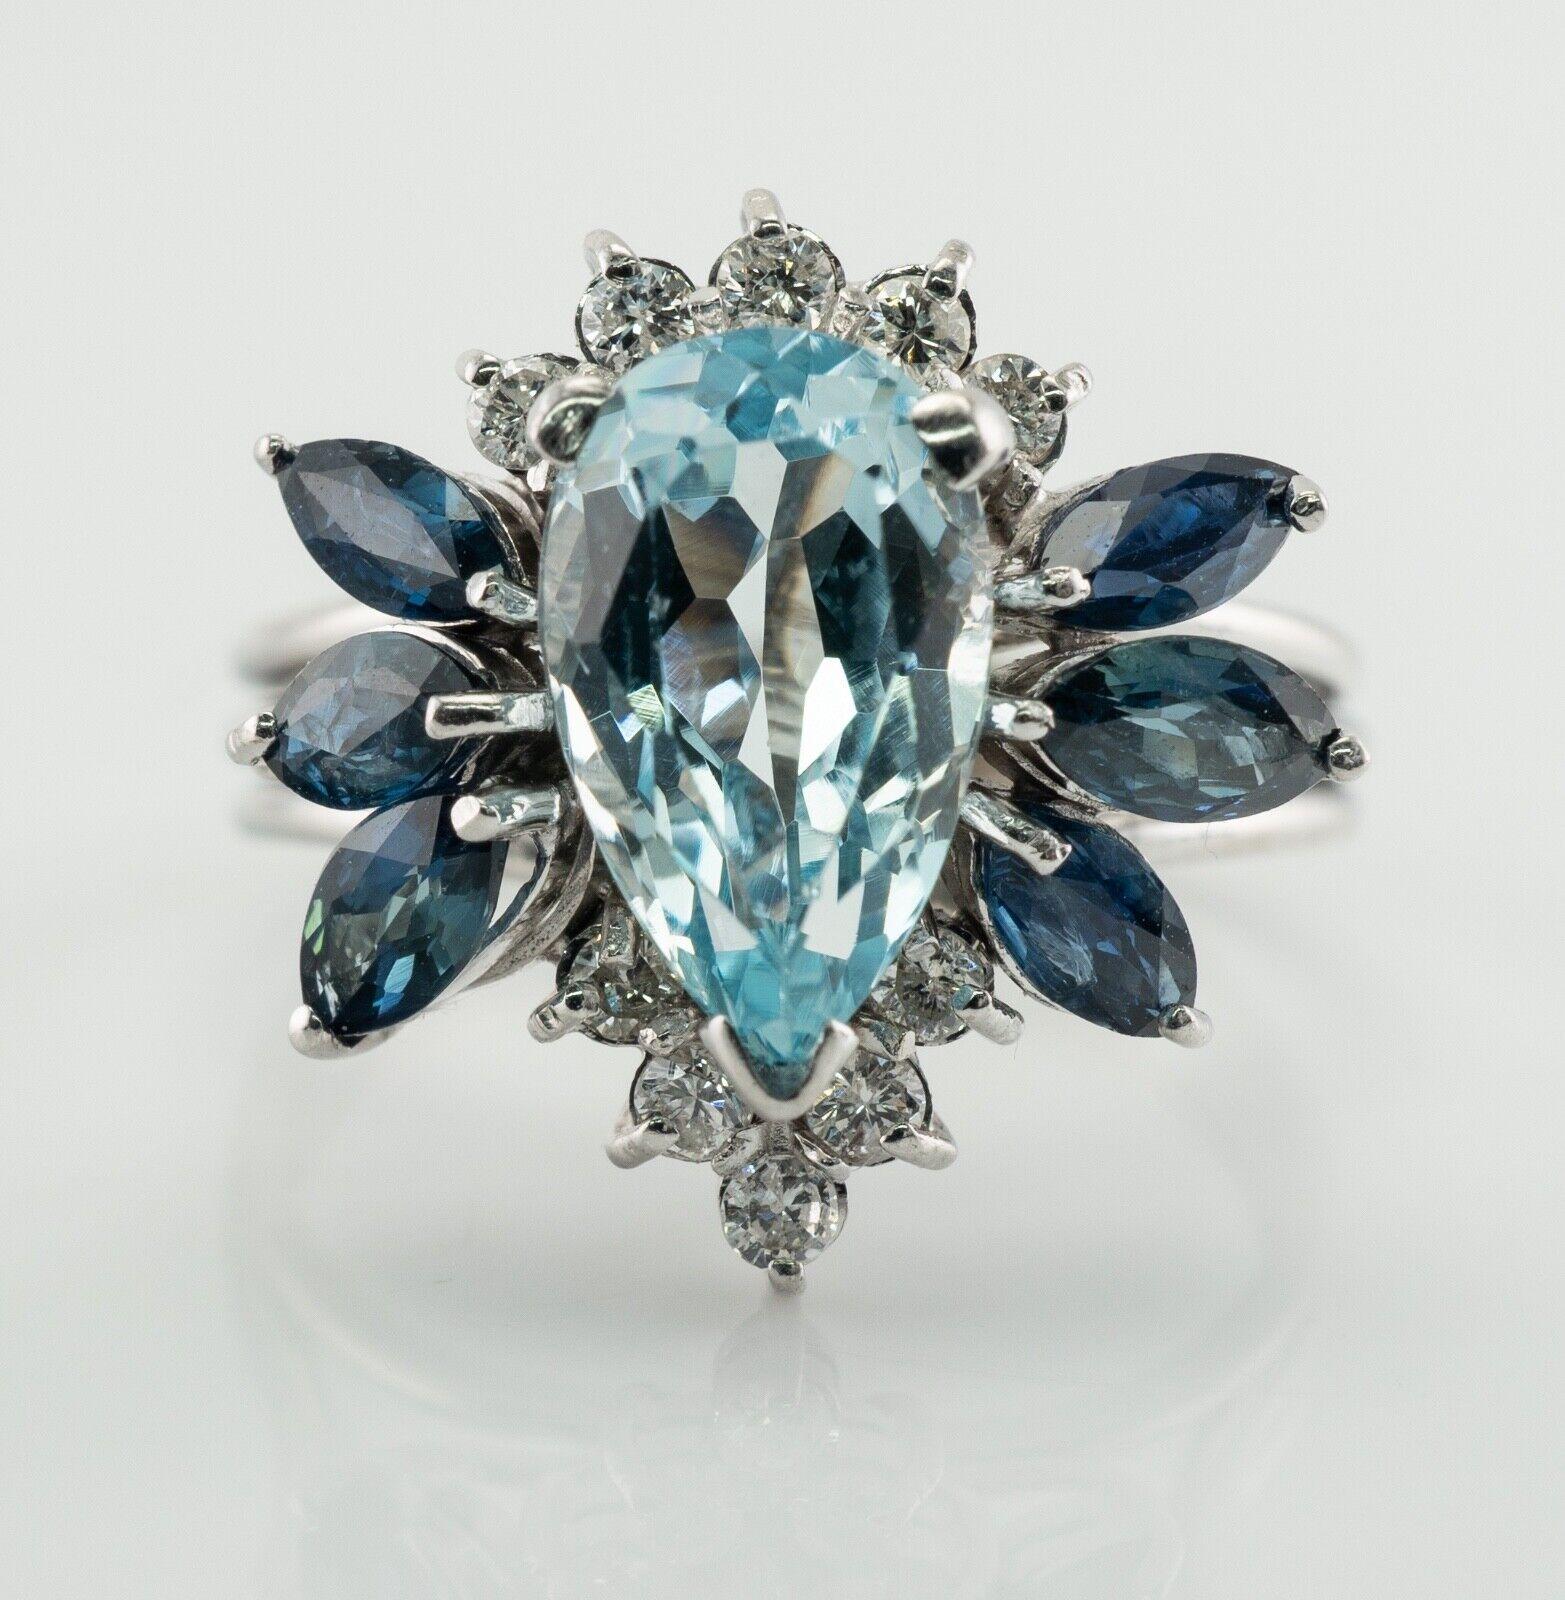 This estate ring is crafted in solid 14K White Gold
The natural Earth mined pear cut Aquamarine in the center measures 12mm x 7mm = 2.49 carats.
Six marquise cut natural blue Sapphires are 5x2mm and 5x3mm = 1.20 carats.
All colored stones are